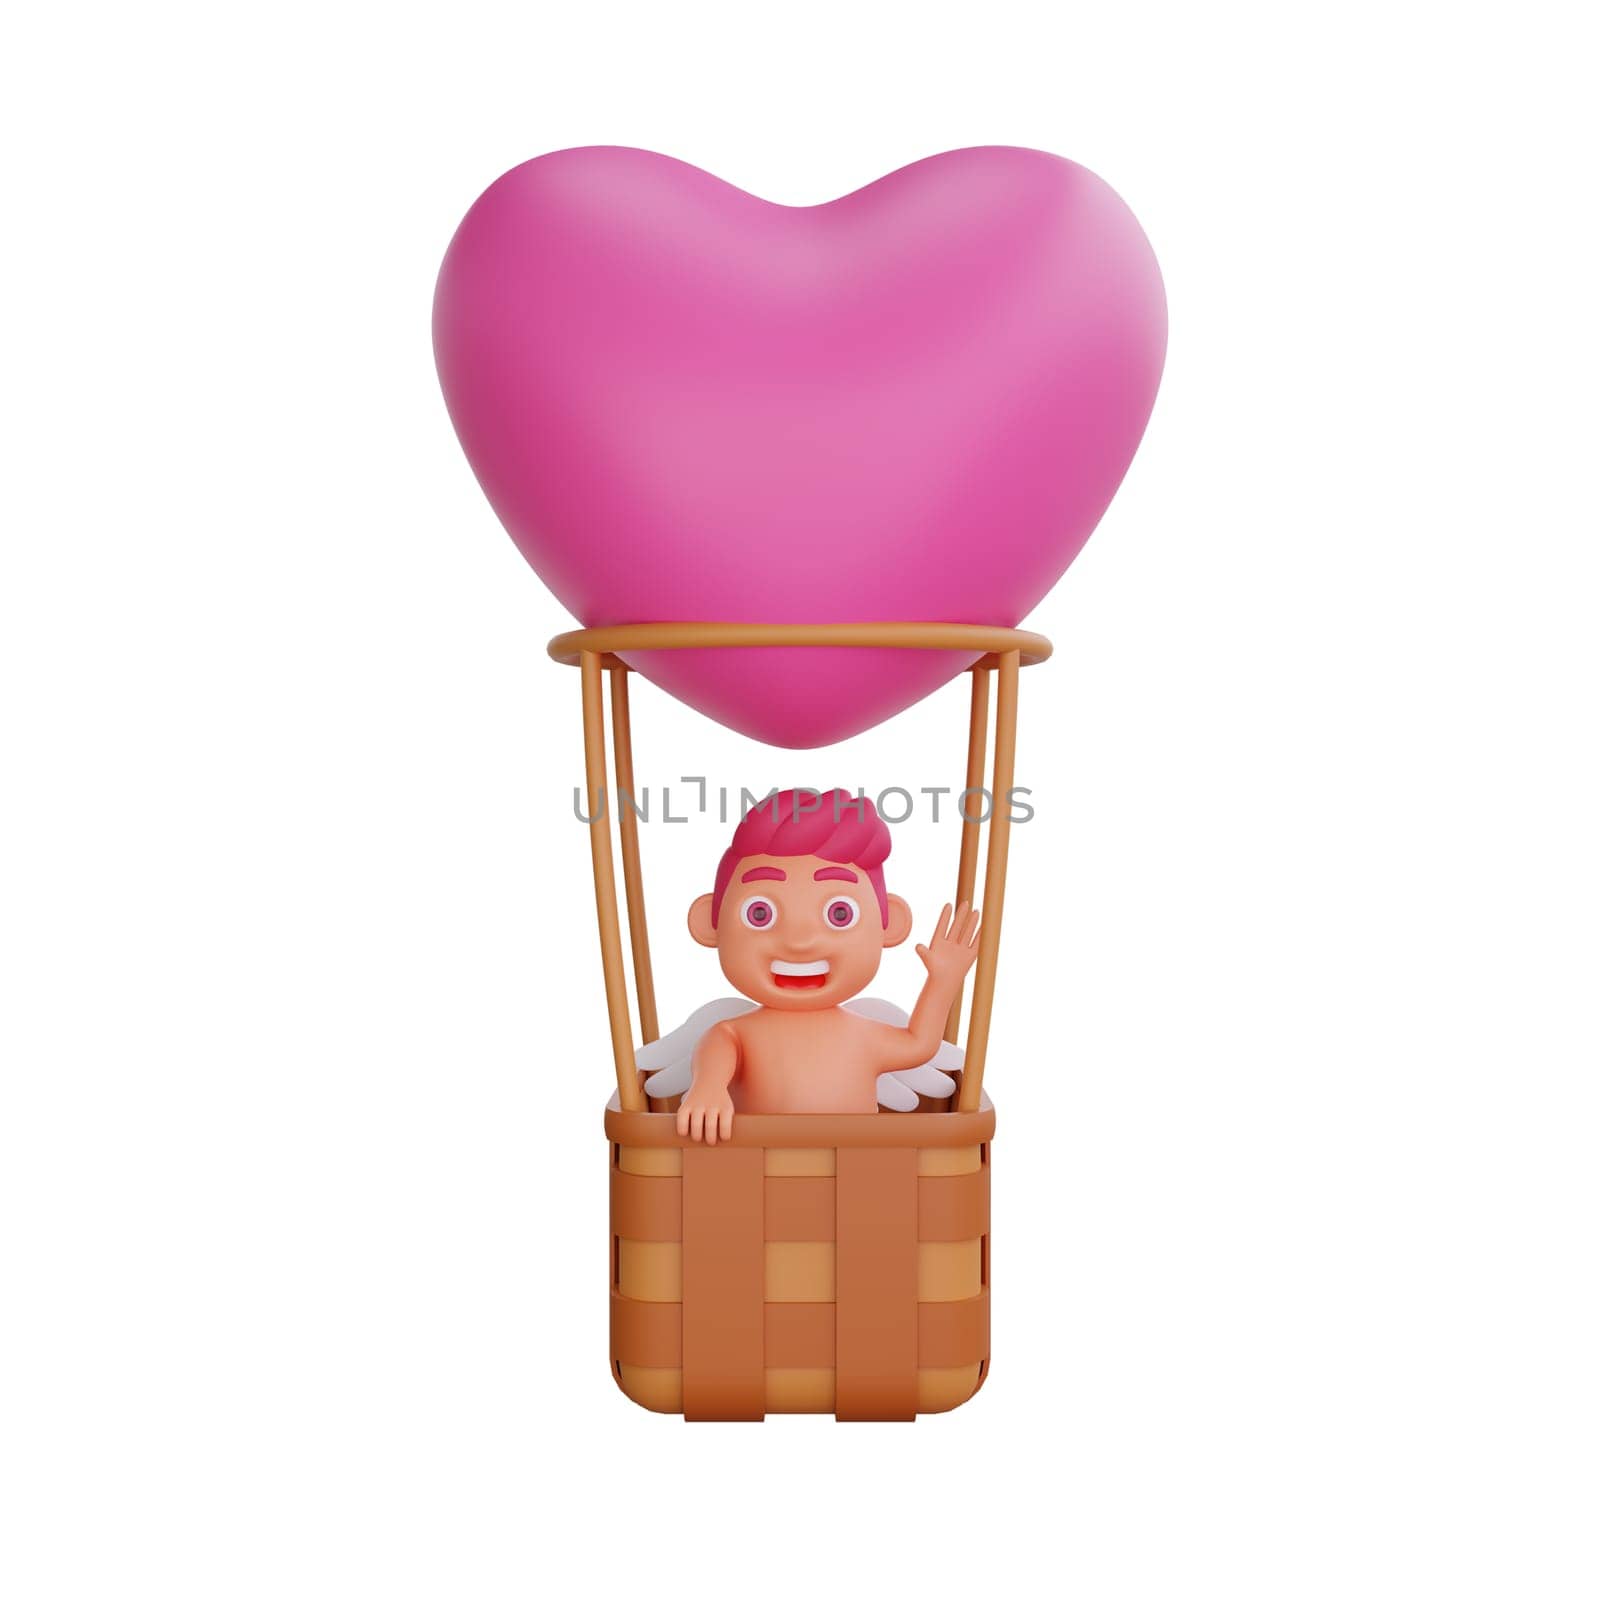 3D illustration of Valentine Cupid character waving from a heart-shaped hot air balloon, symbolizing love and adventure, perfect for Valentine or love themed projects